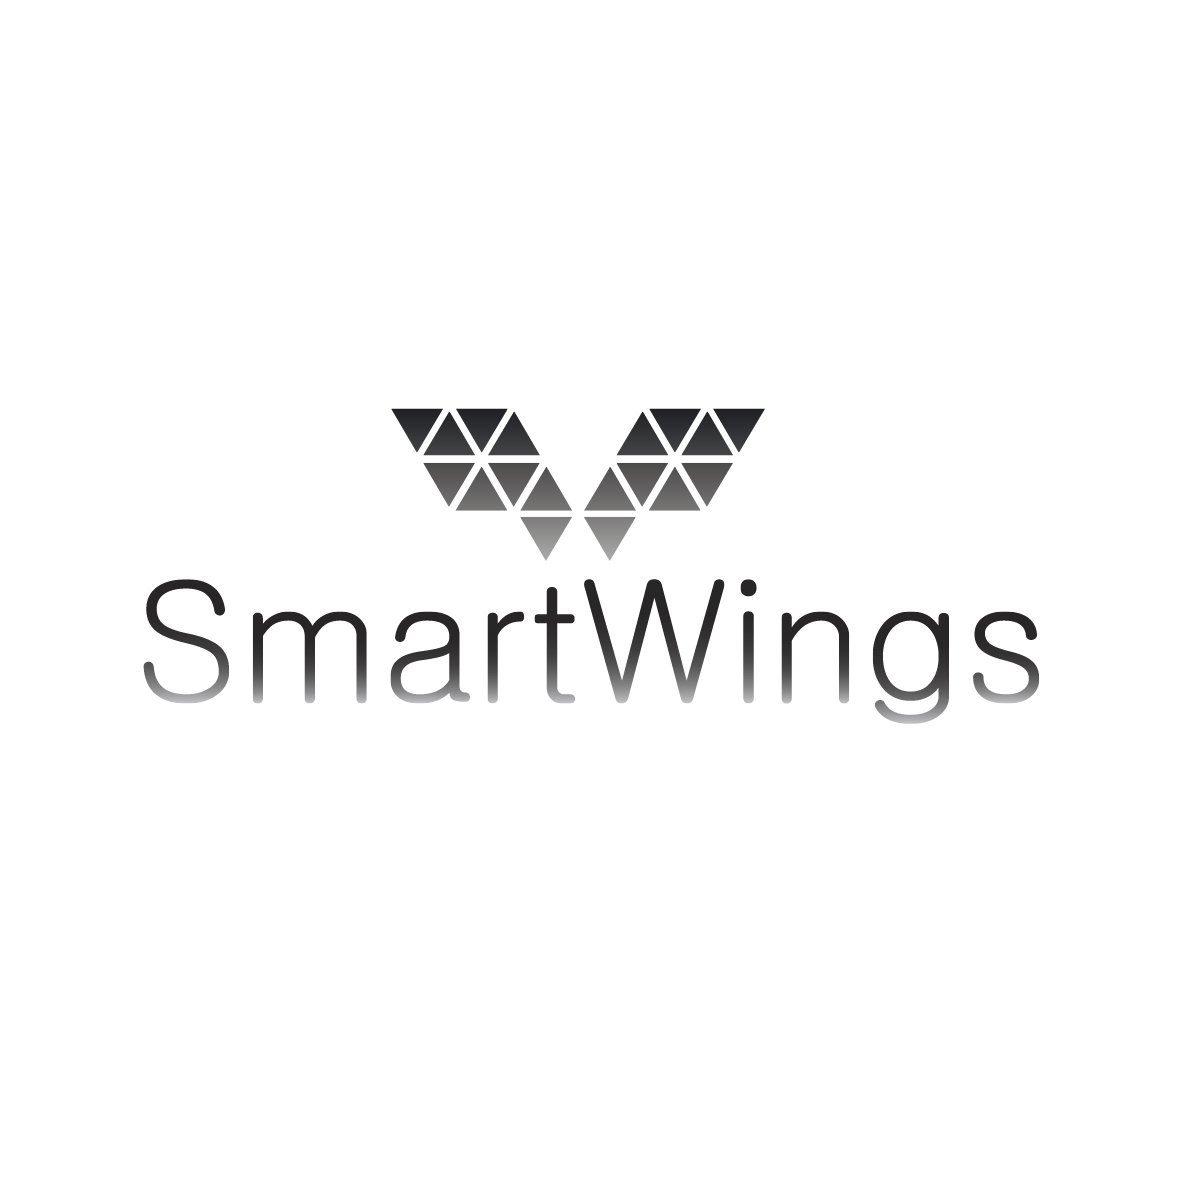 smartwings